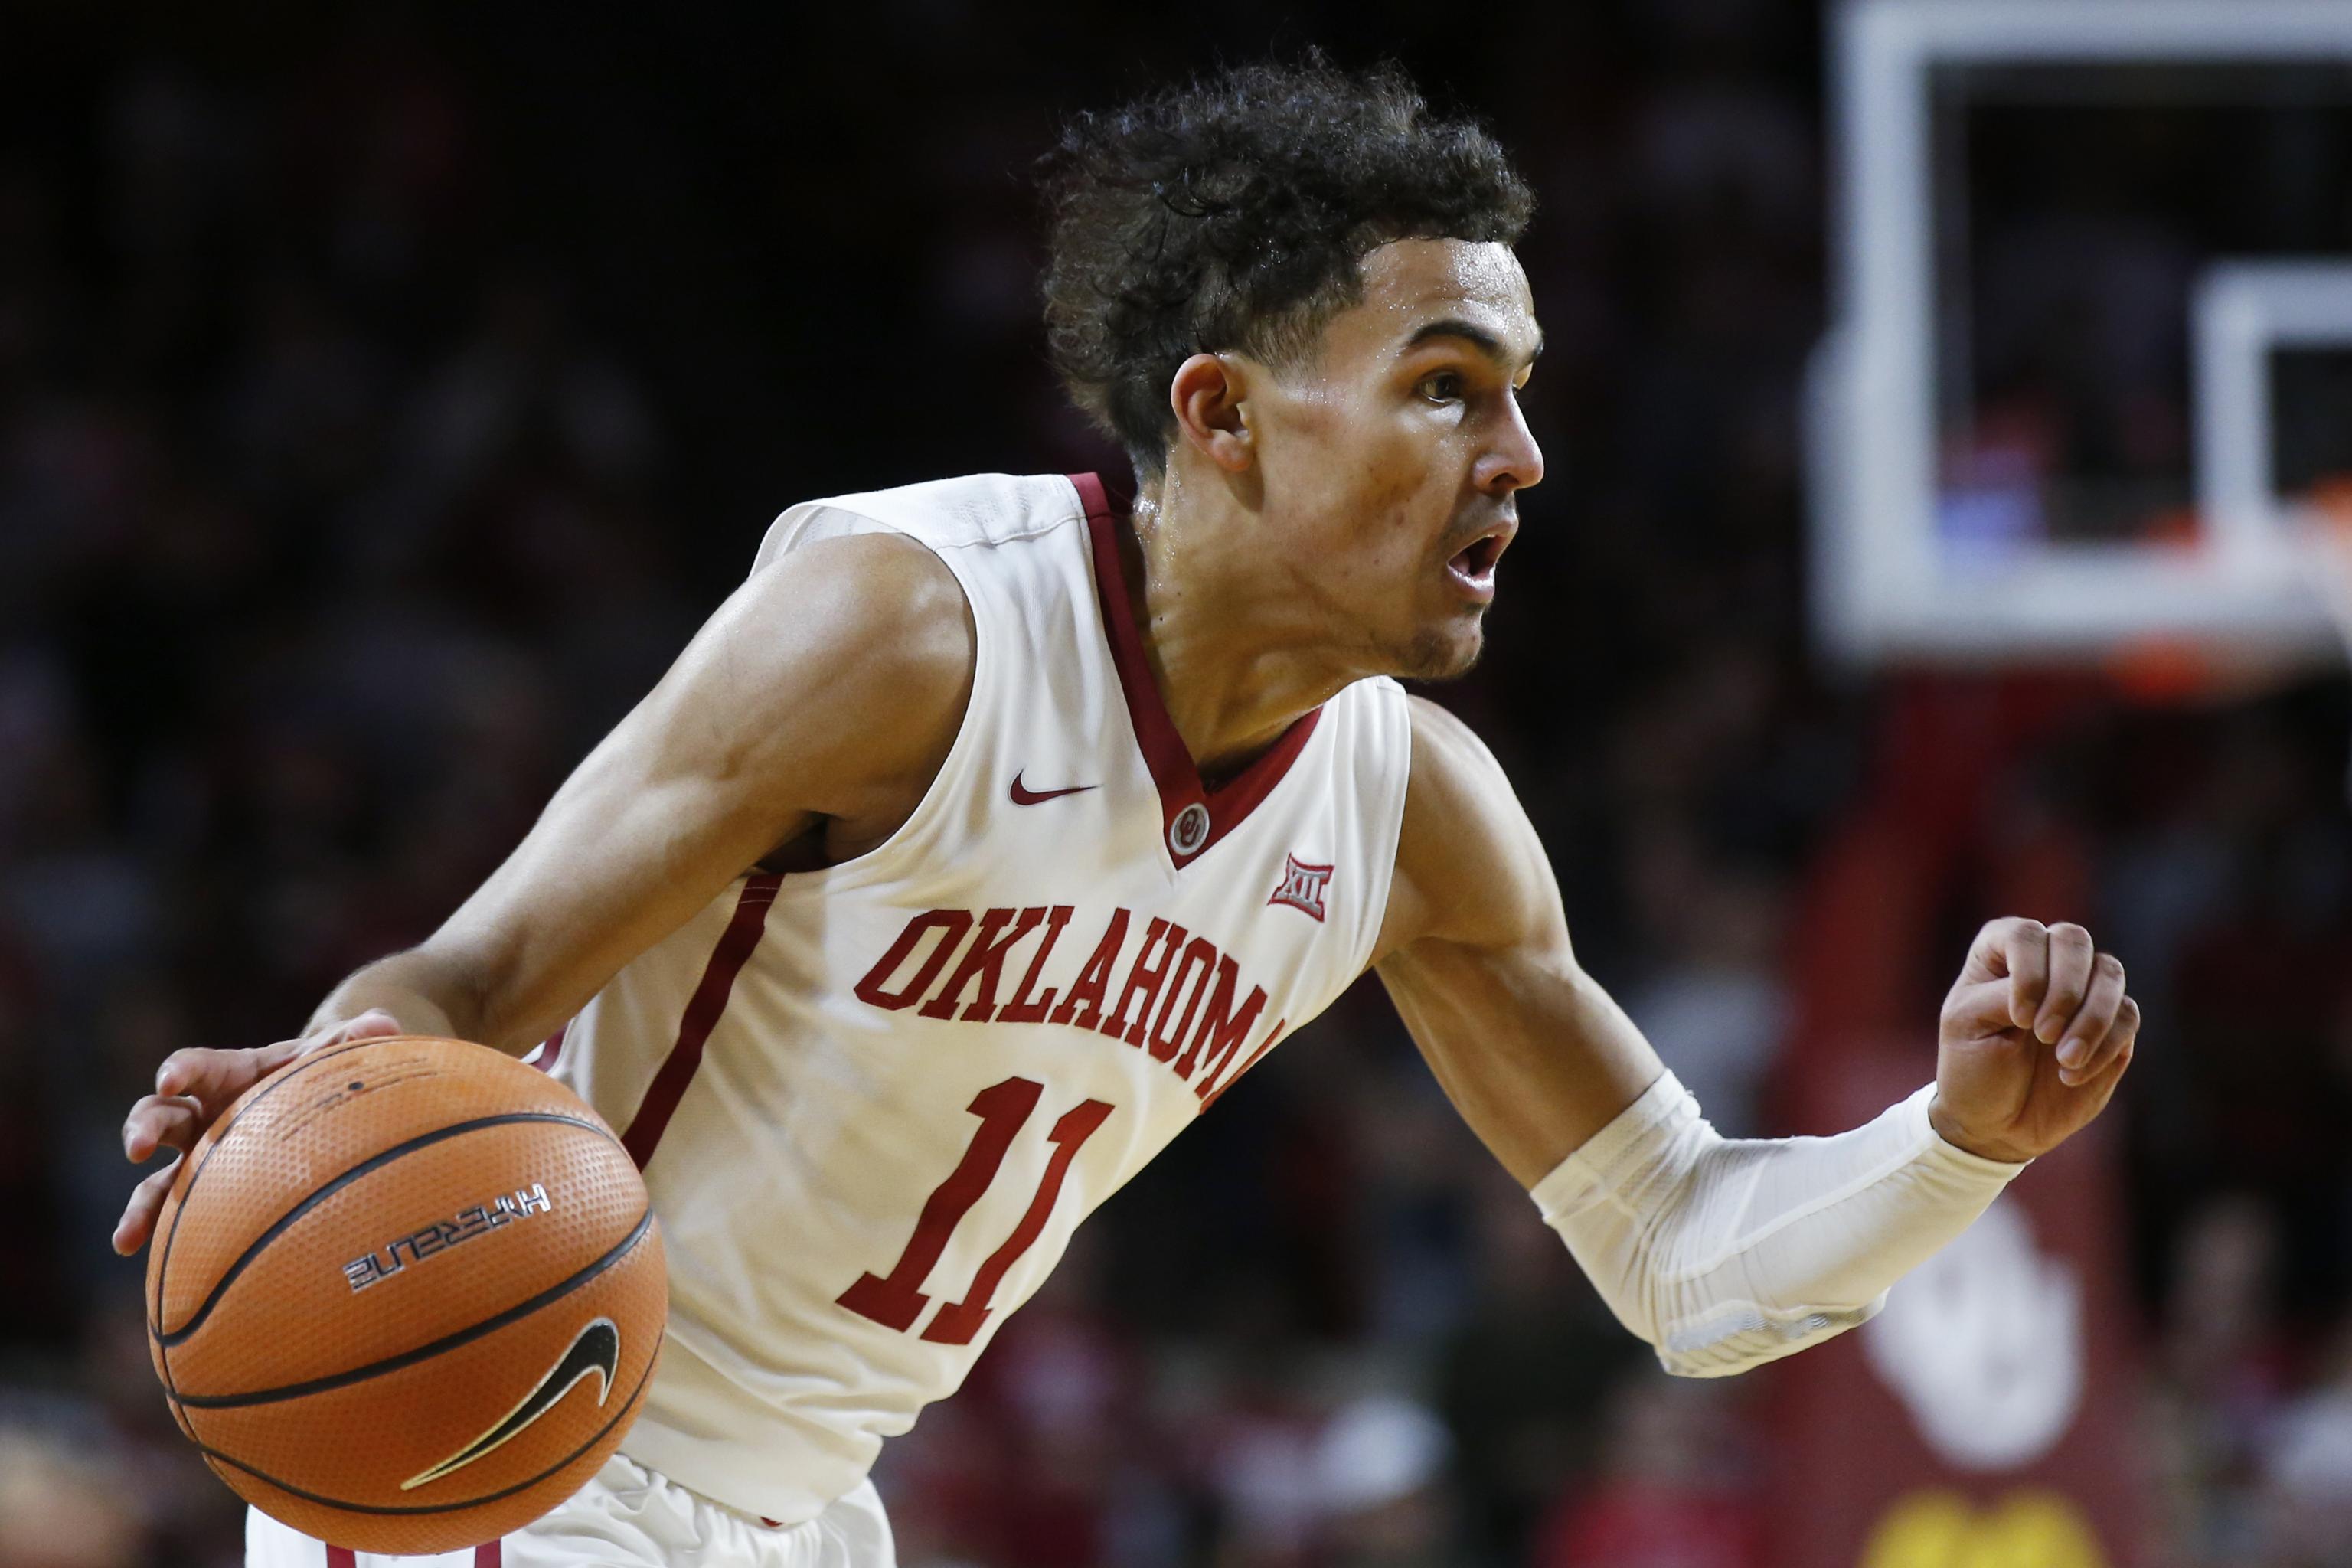 New York Knicks: Trae Young confident he's ready after big freshman season